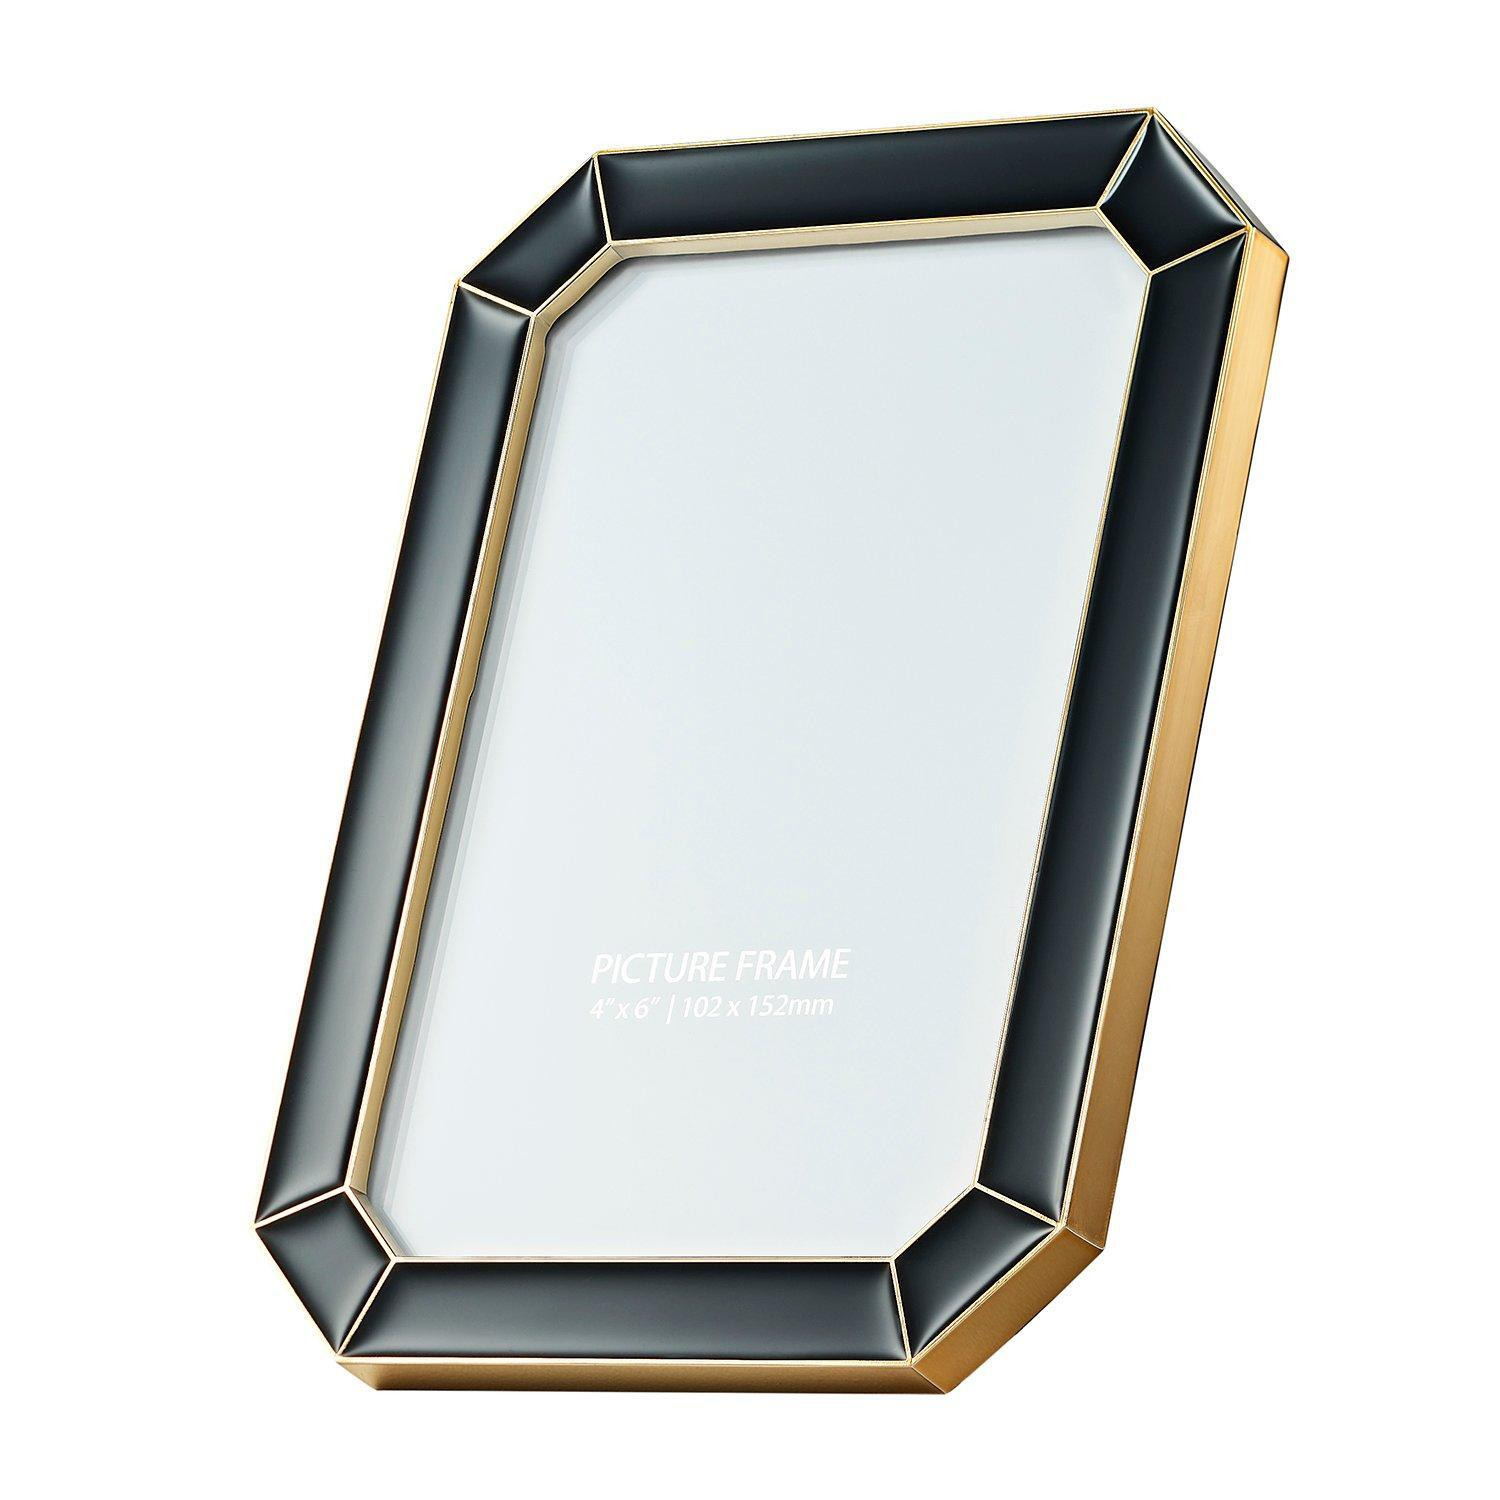 Modern Designer Gloss Epoxy Picture Frame with Plated Metal Trim - image 1